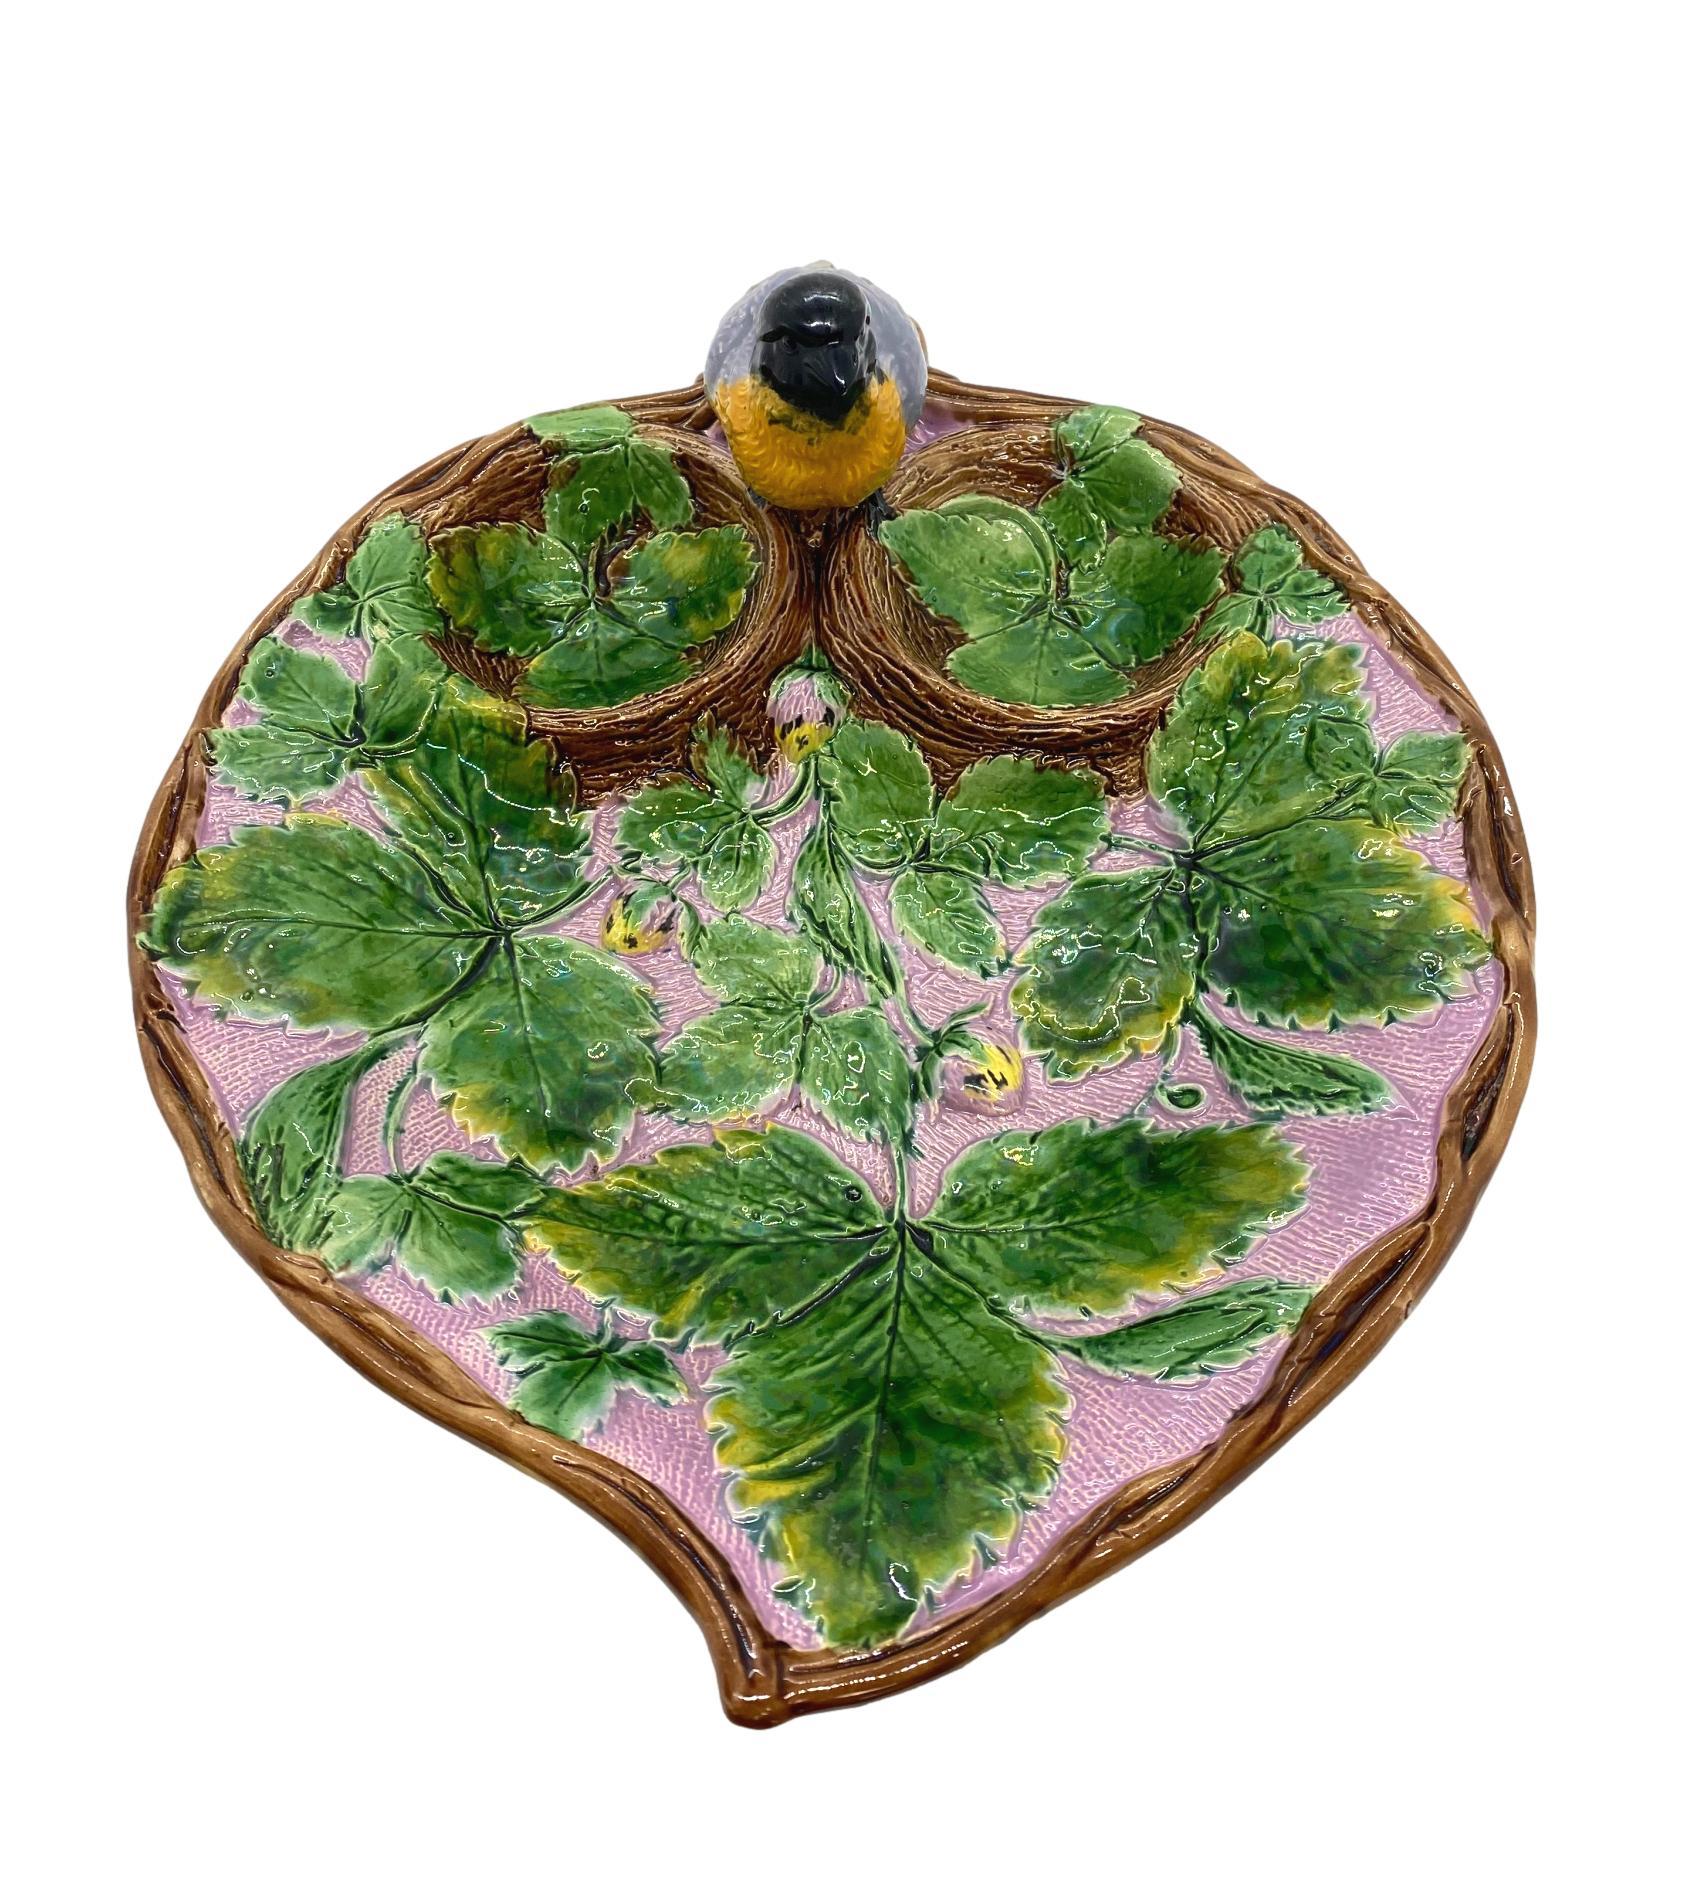 Holdcroft Majolica Strawberry Server, the relief molded dish of leaf form with green glazed strawberry leaves, with pink and yellow glazed strawberries, the cream and sugar wells naturalistically molded as birds' nests, each lined with strawberry